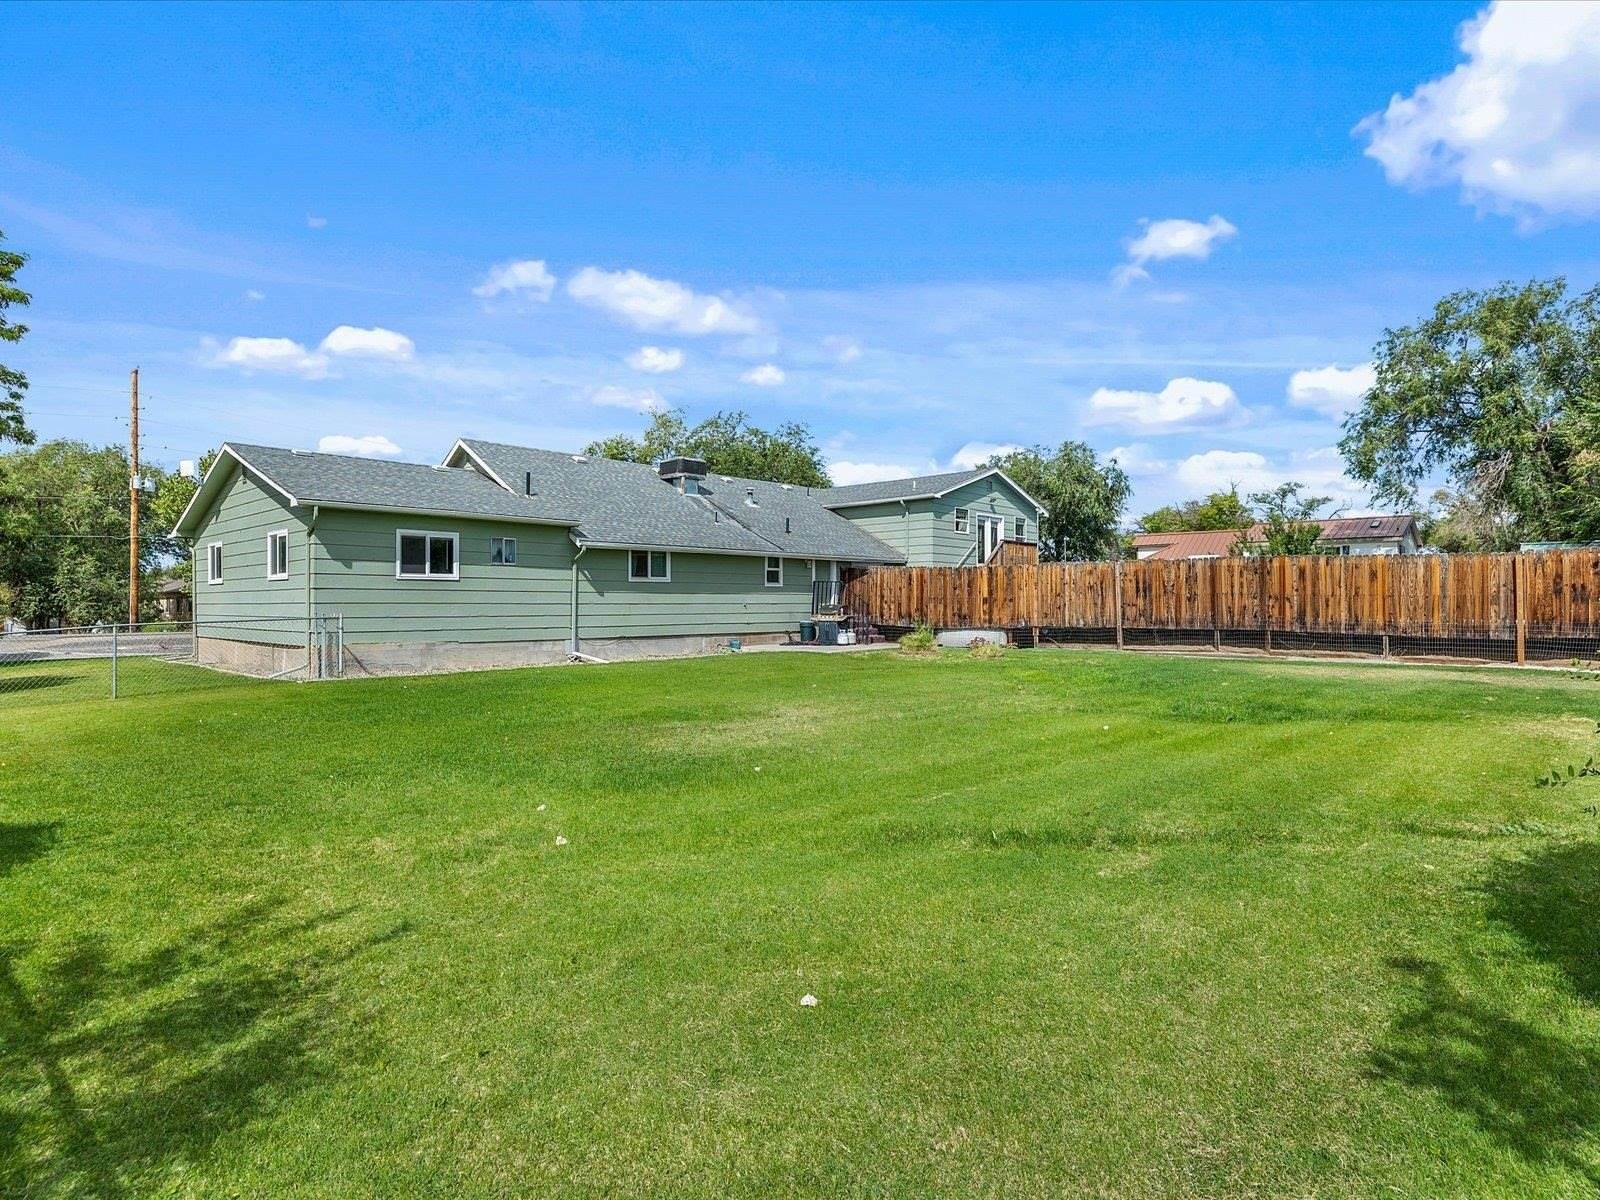 790 24 Road, Grand Junction, CO 81505